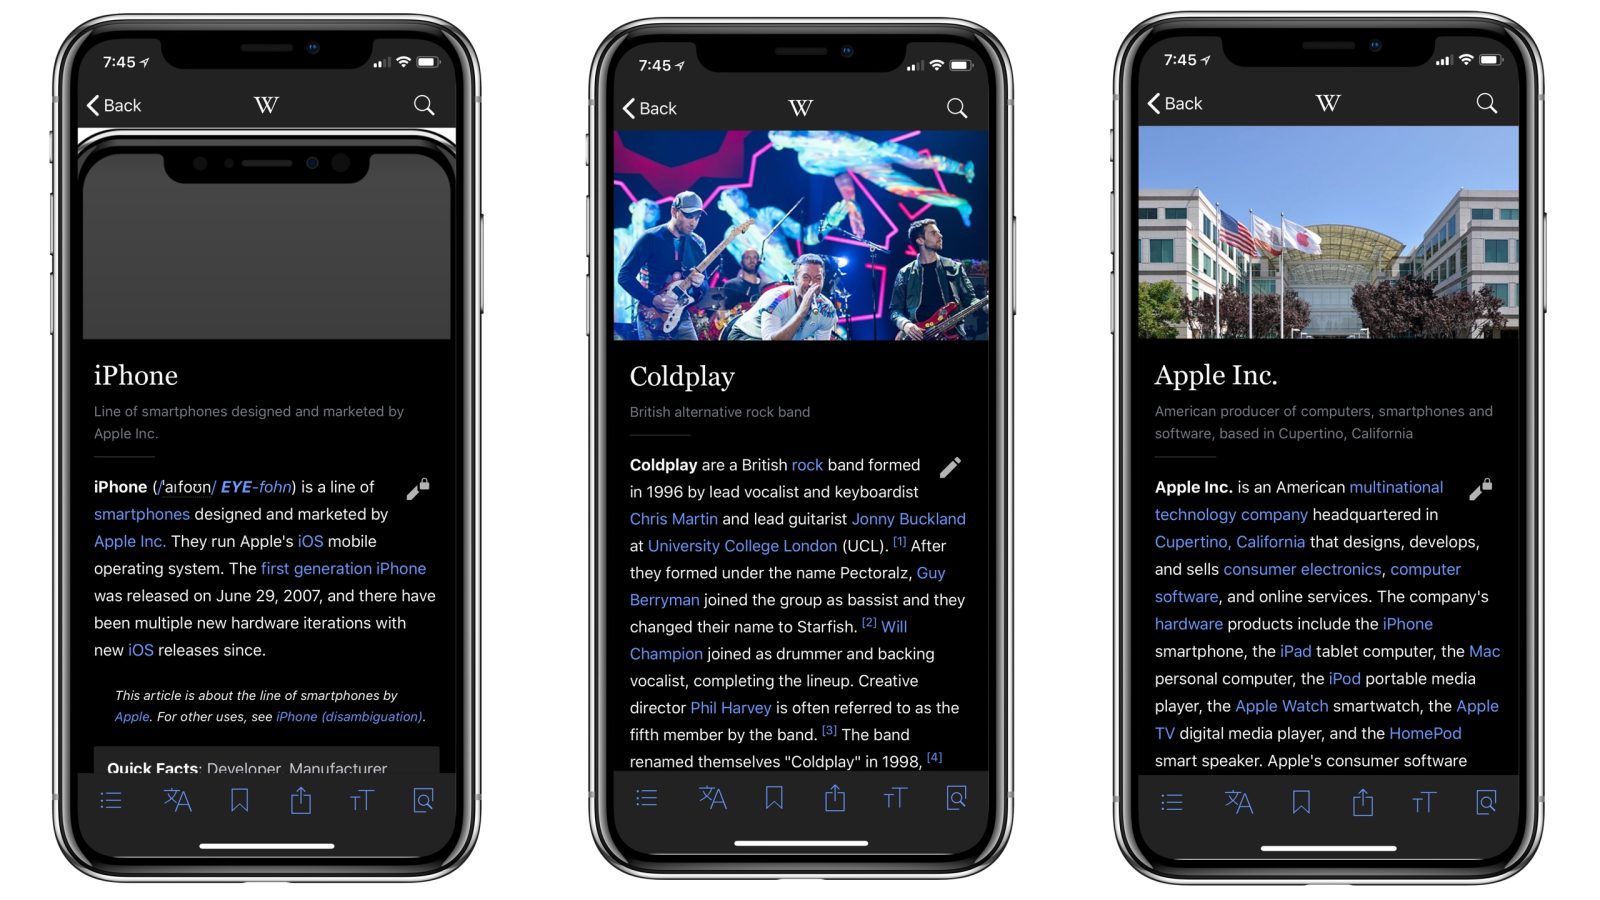 Wikipedia For Ios Adds New Black Mode For Iphone X S Oled Display